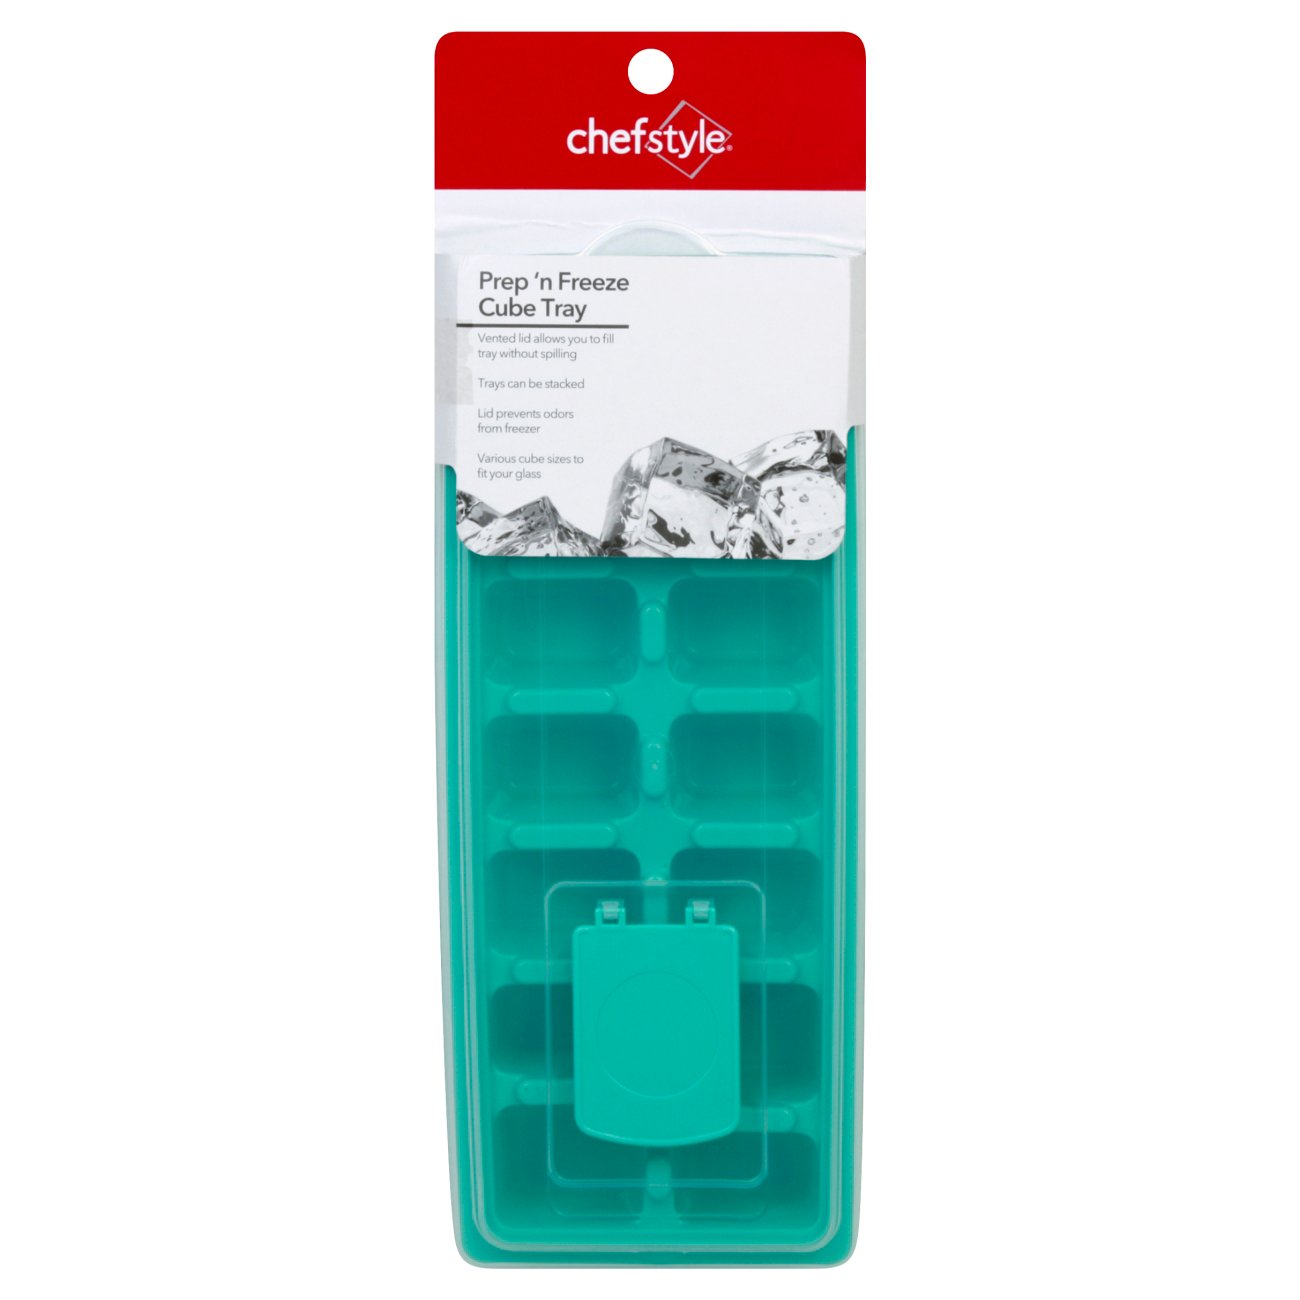 Kitchen & Table by H-E-B 6 Cavity Silicone Ice Cube Tray with Lid